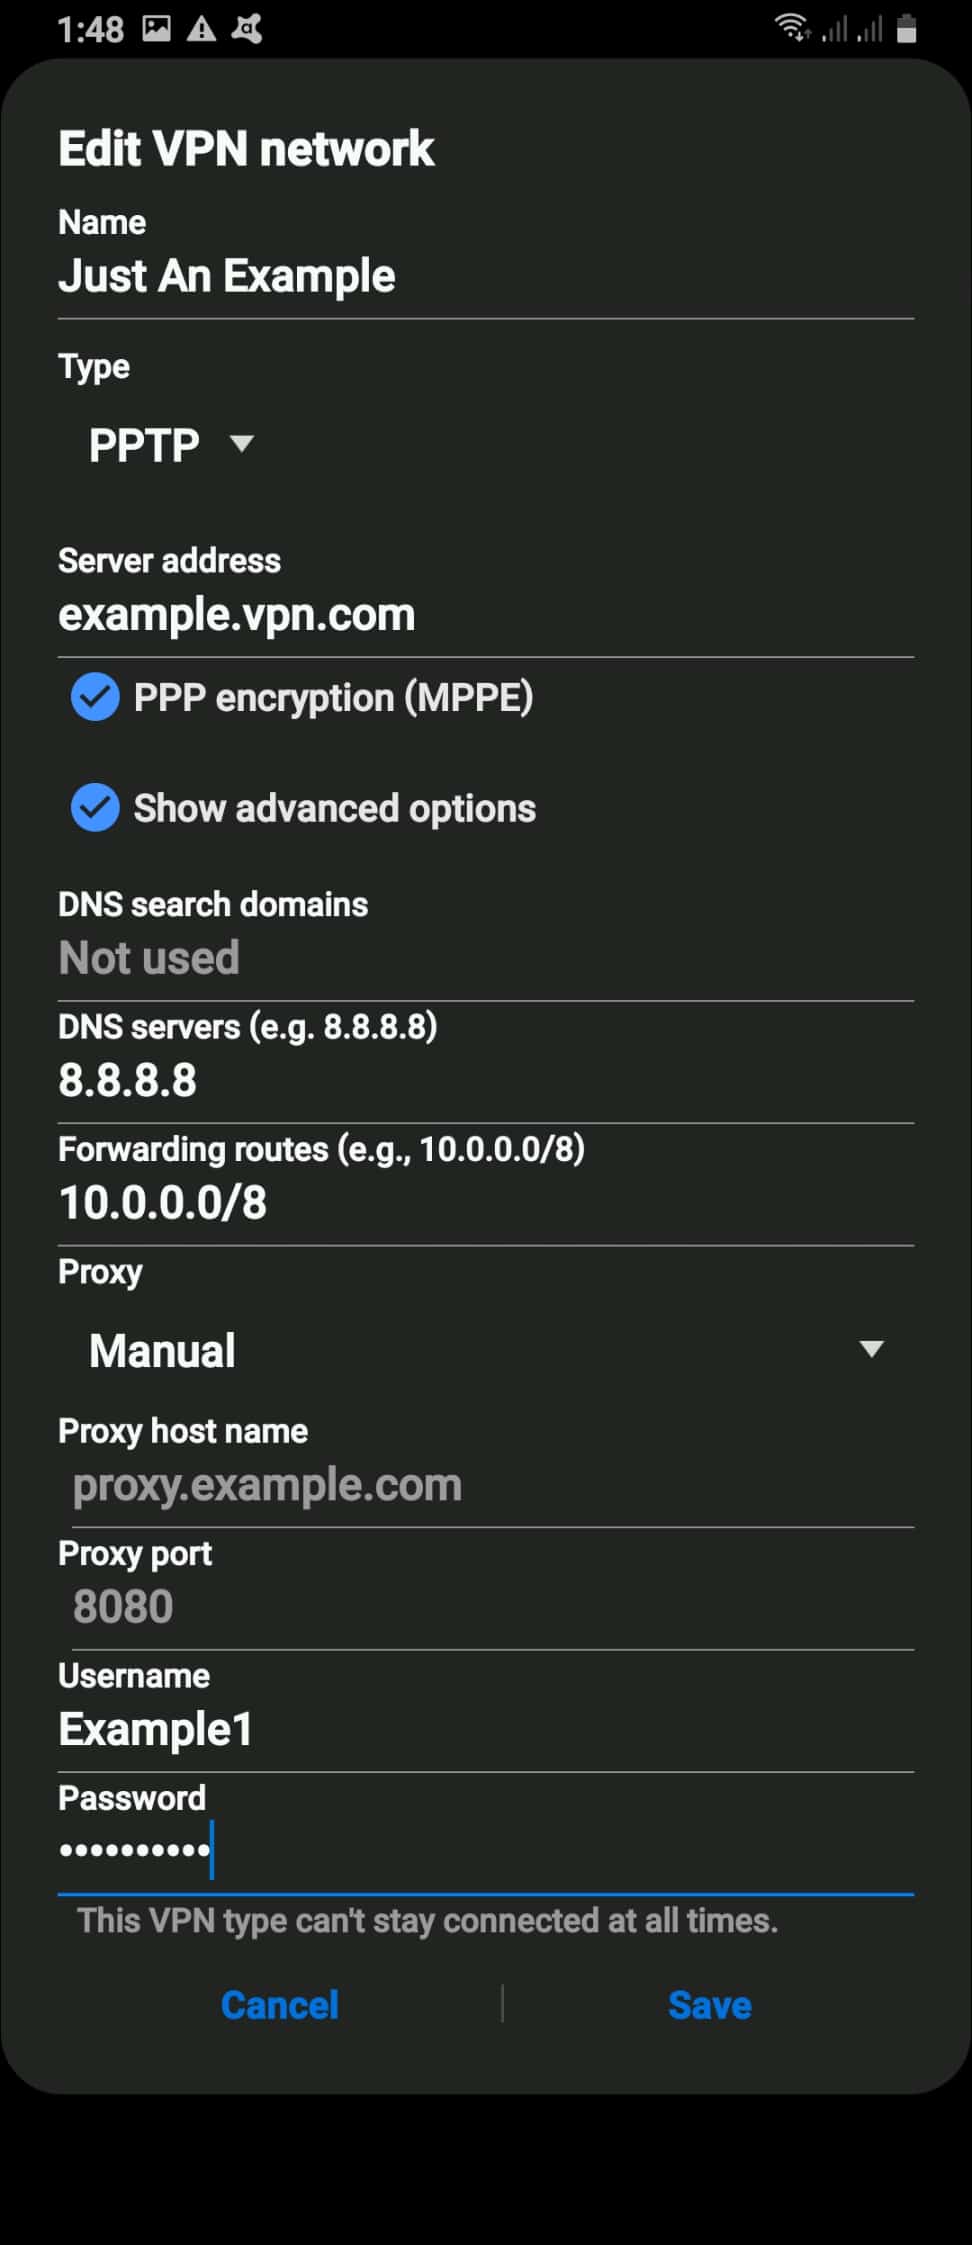 How can I setup a free VPN on my Android phone for free?